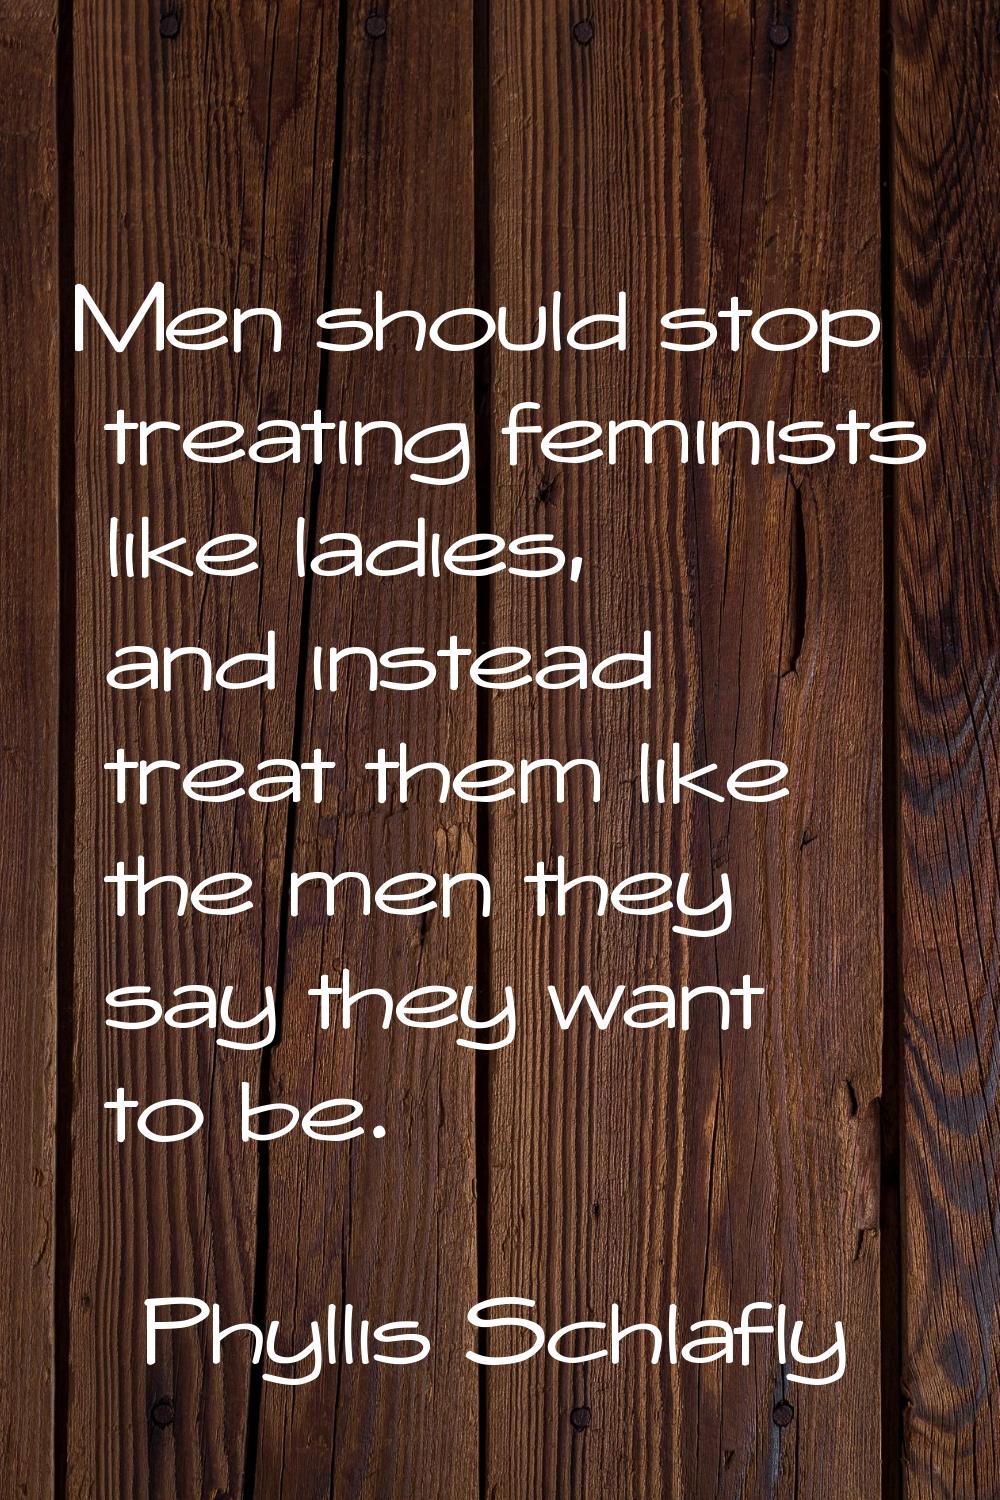 Men should stop treating feminists like ladies, and instead treat them like the men they say they w